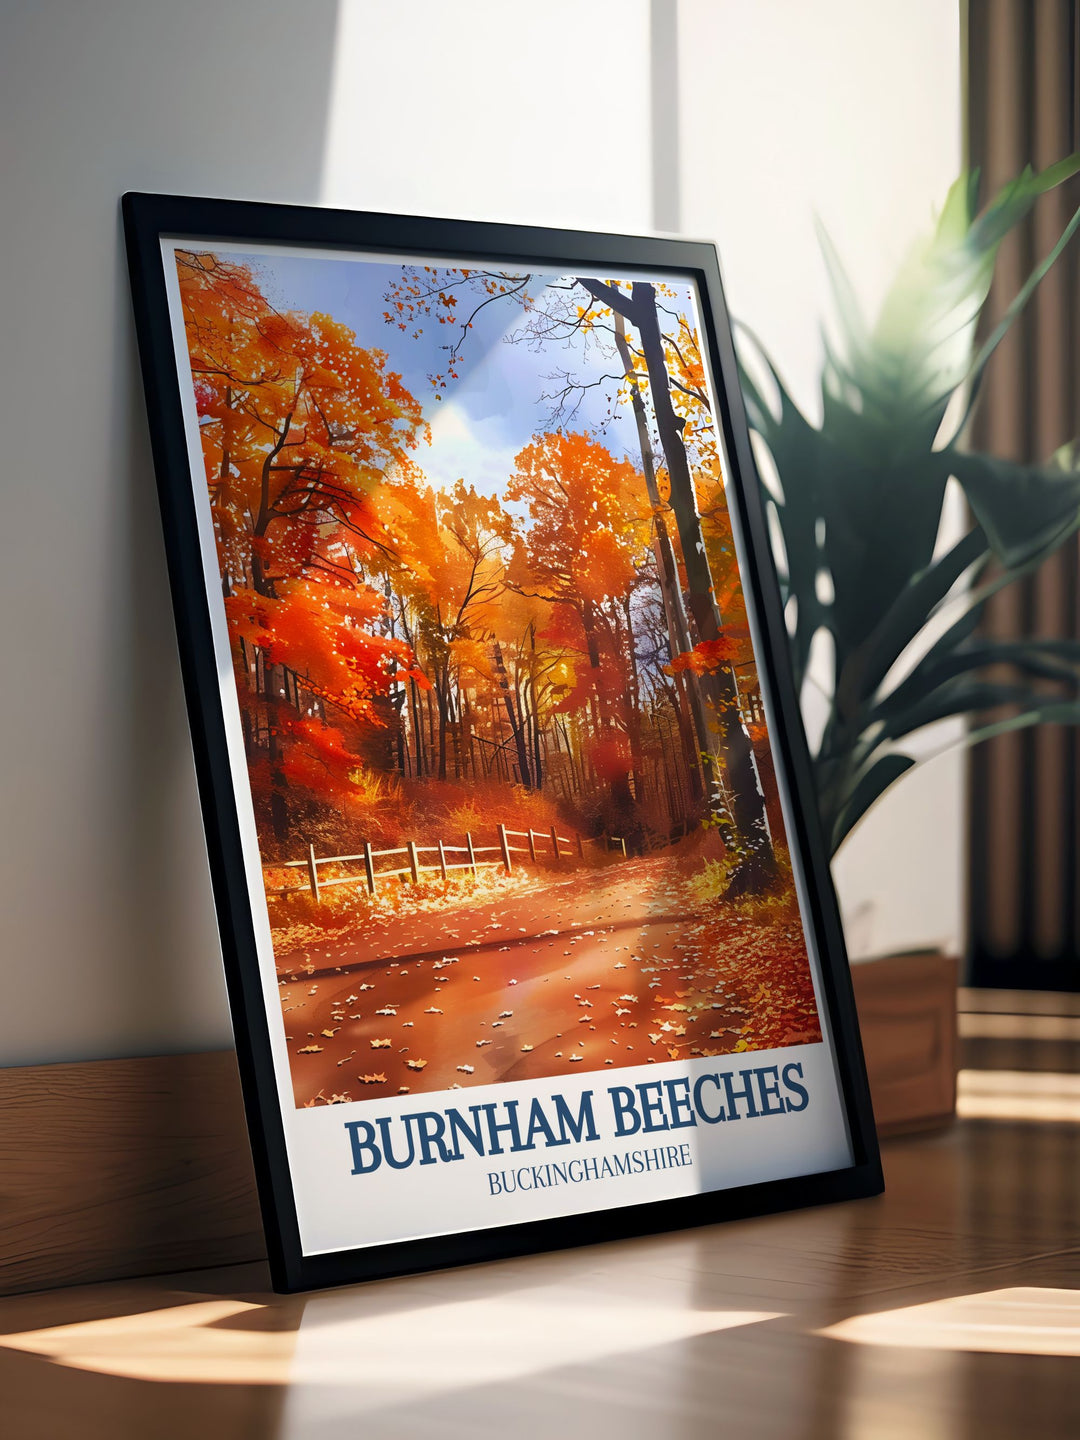 The captivating blend of nature in Burnham Beeches and the historic charm of Hartley Court Moat is beautifully illustrated in this poster, making it a stunning addition to any wall art collection celebrating the UK.